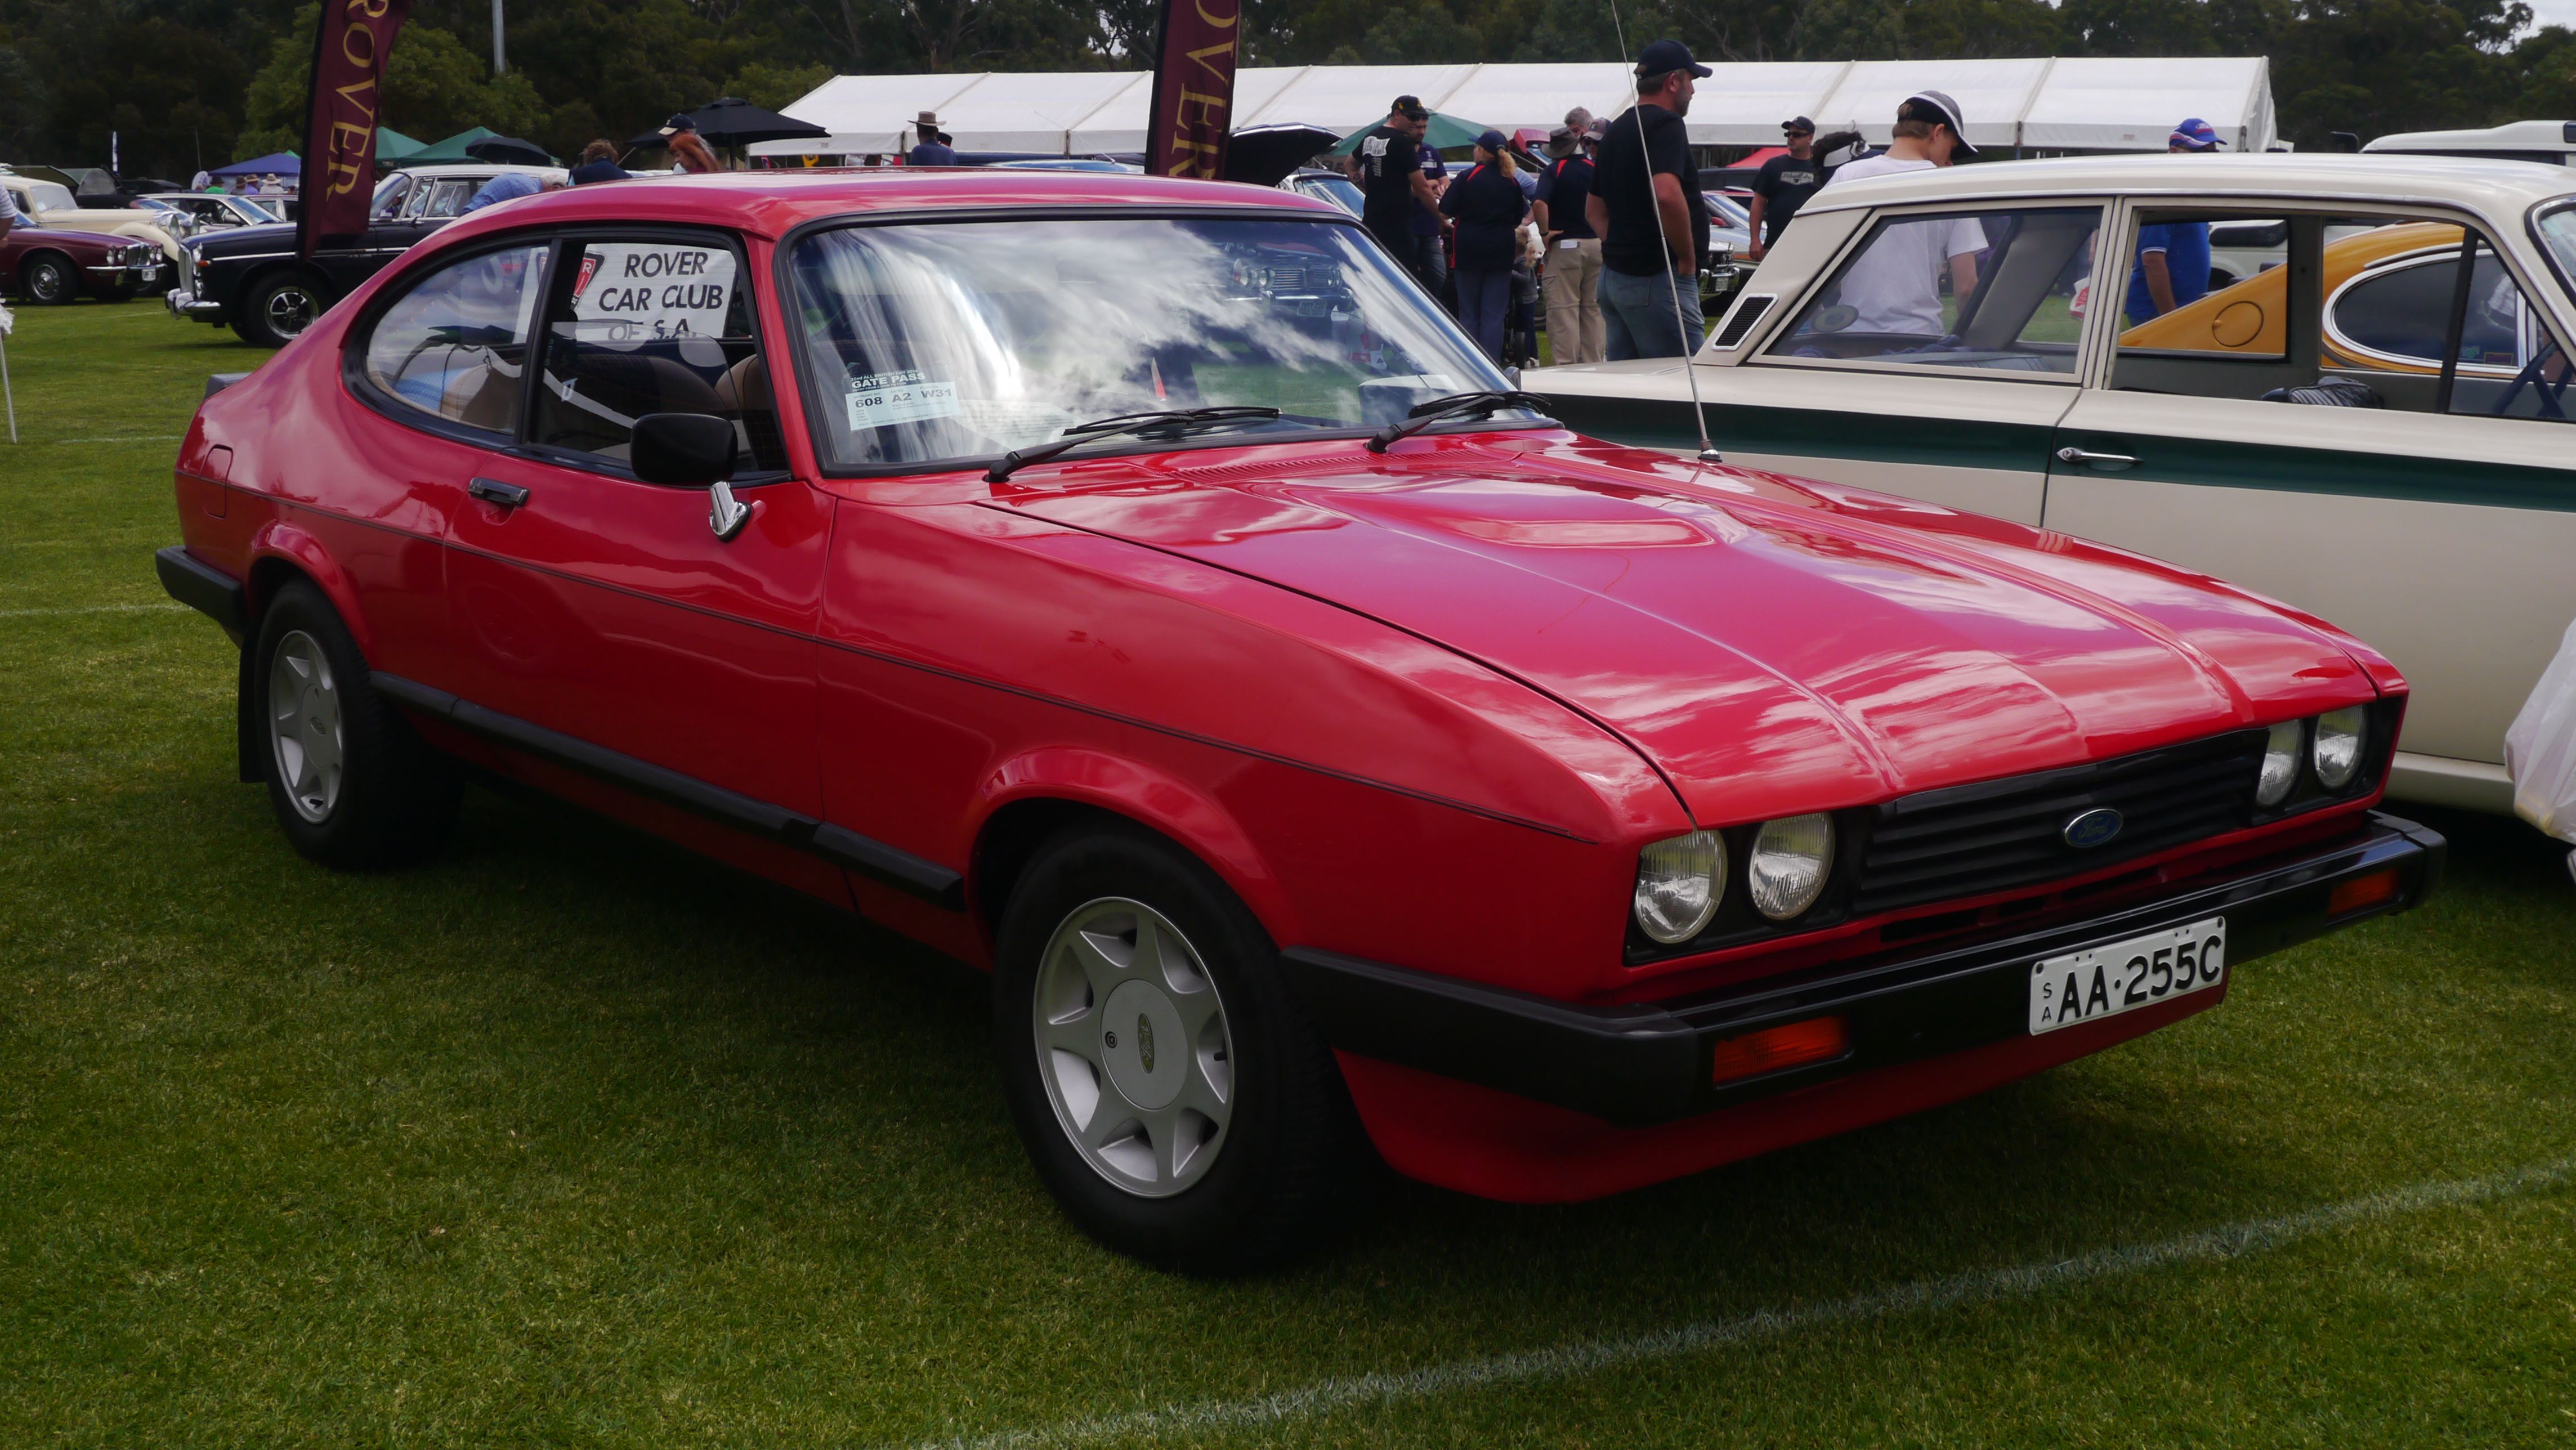 The Ford Capri will be released again